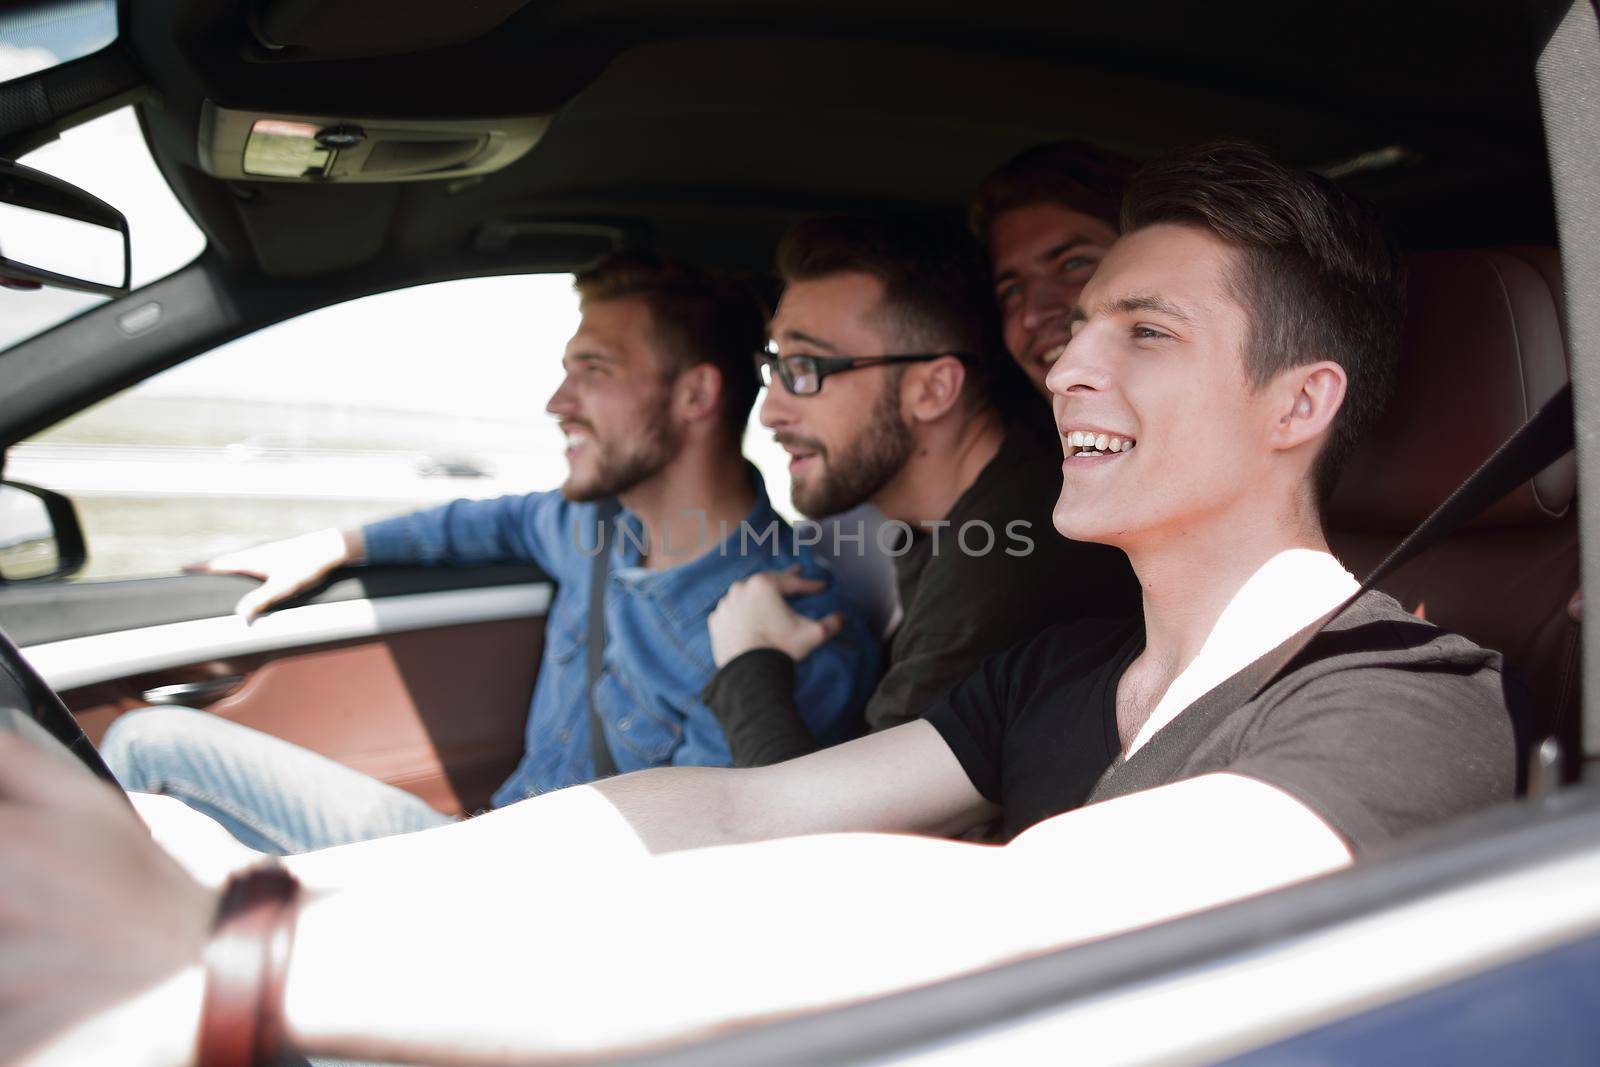 a group of boys rides and looks directly at the car by asdf